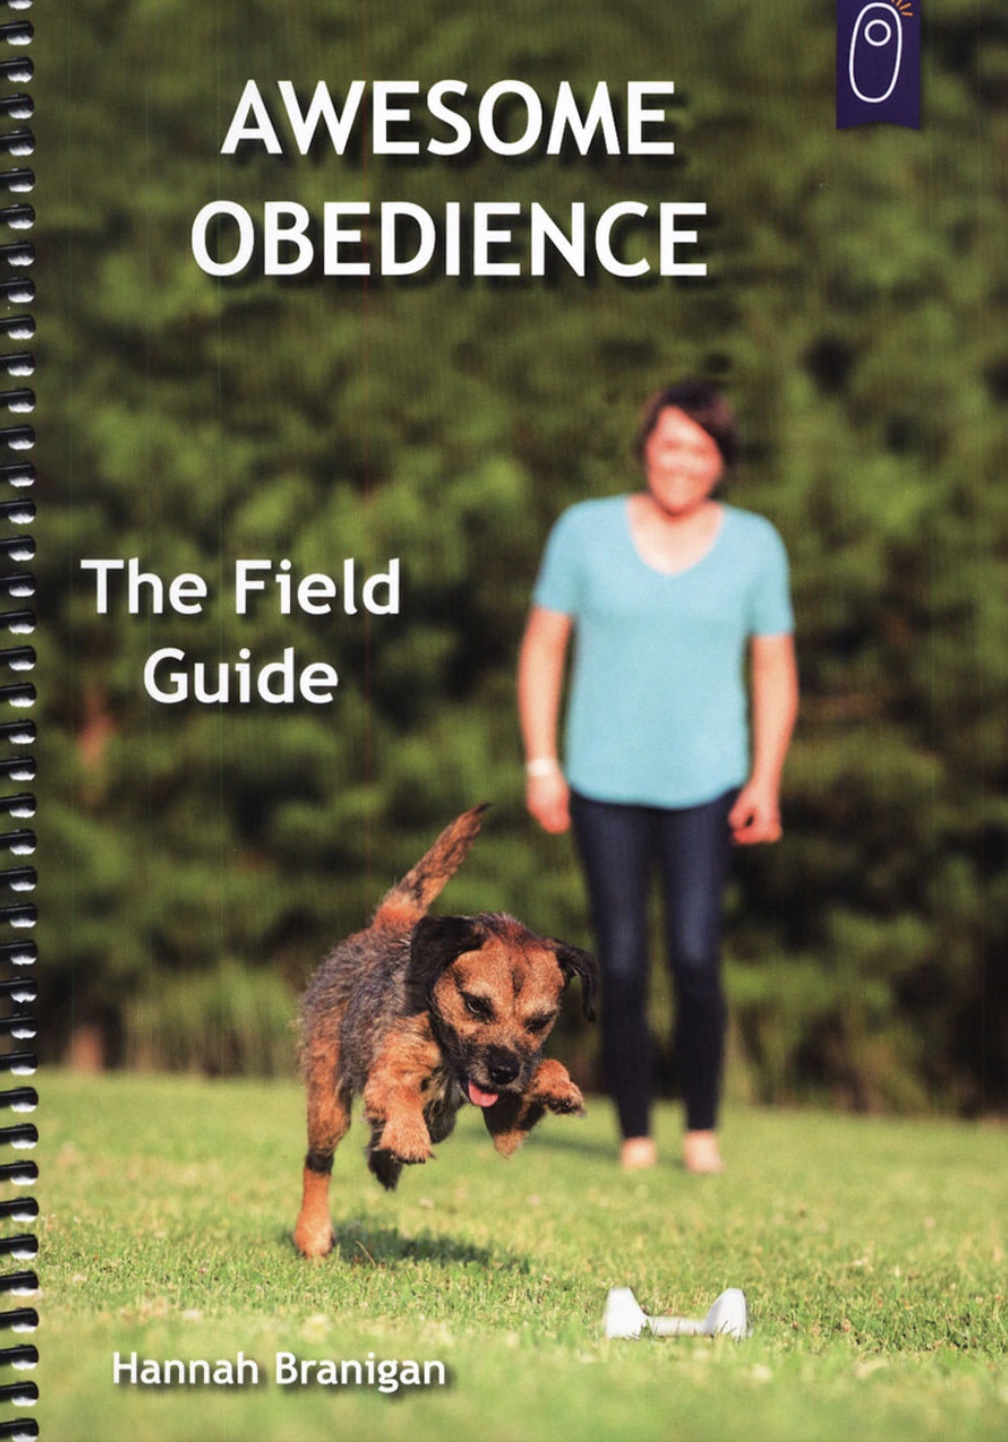 THE FIELD GUIDE : Awesome Obedience